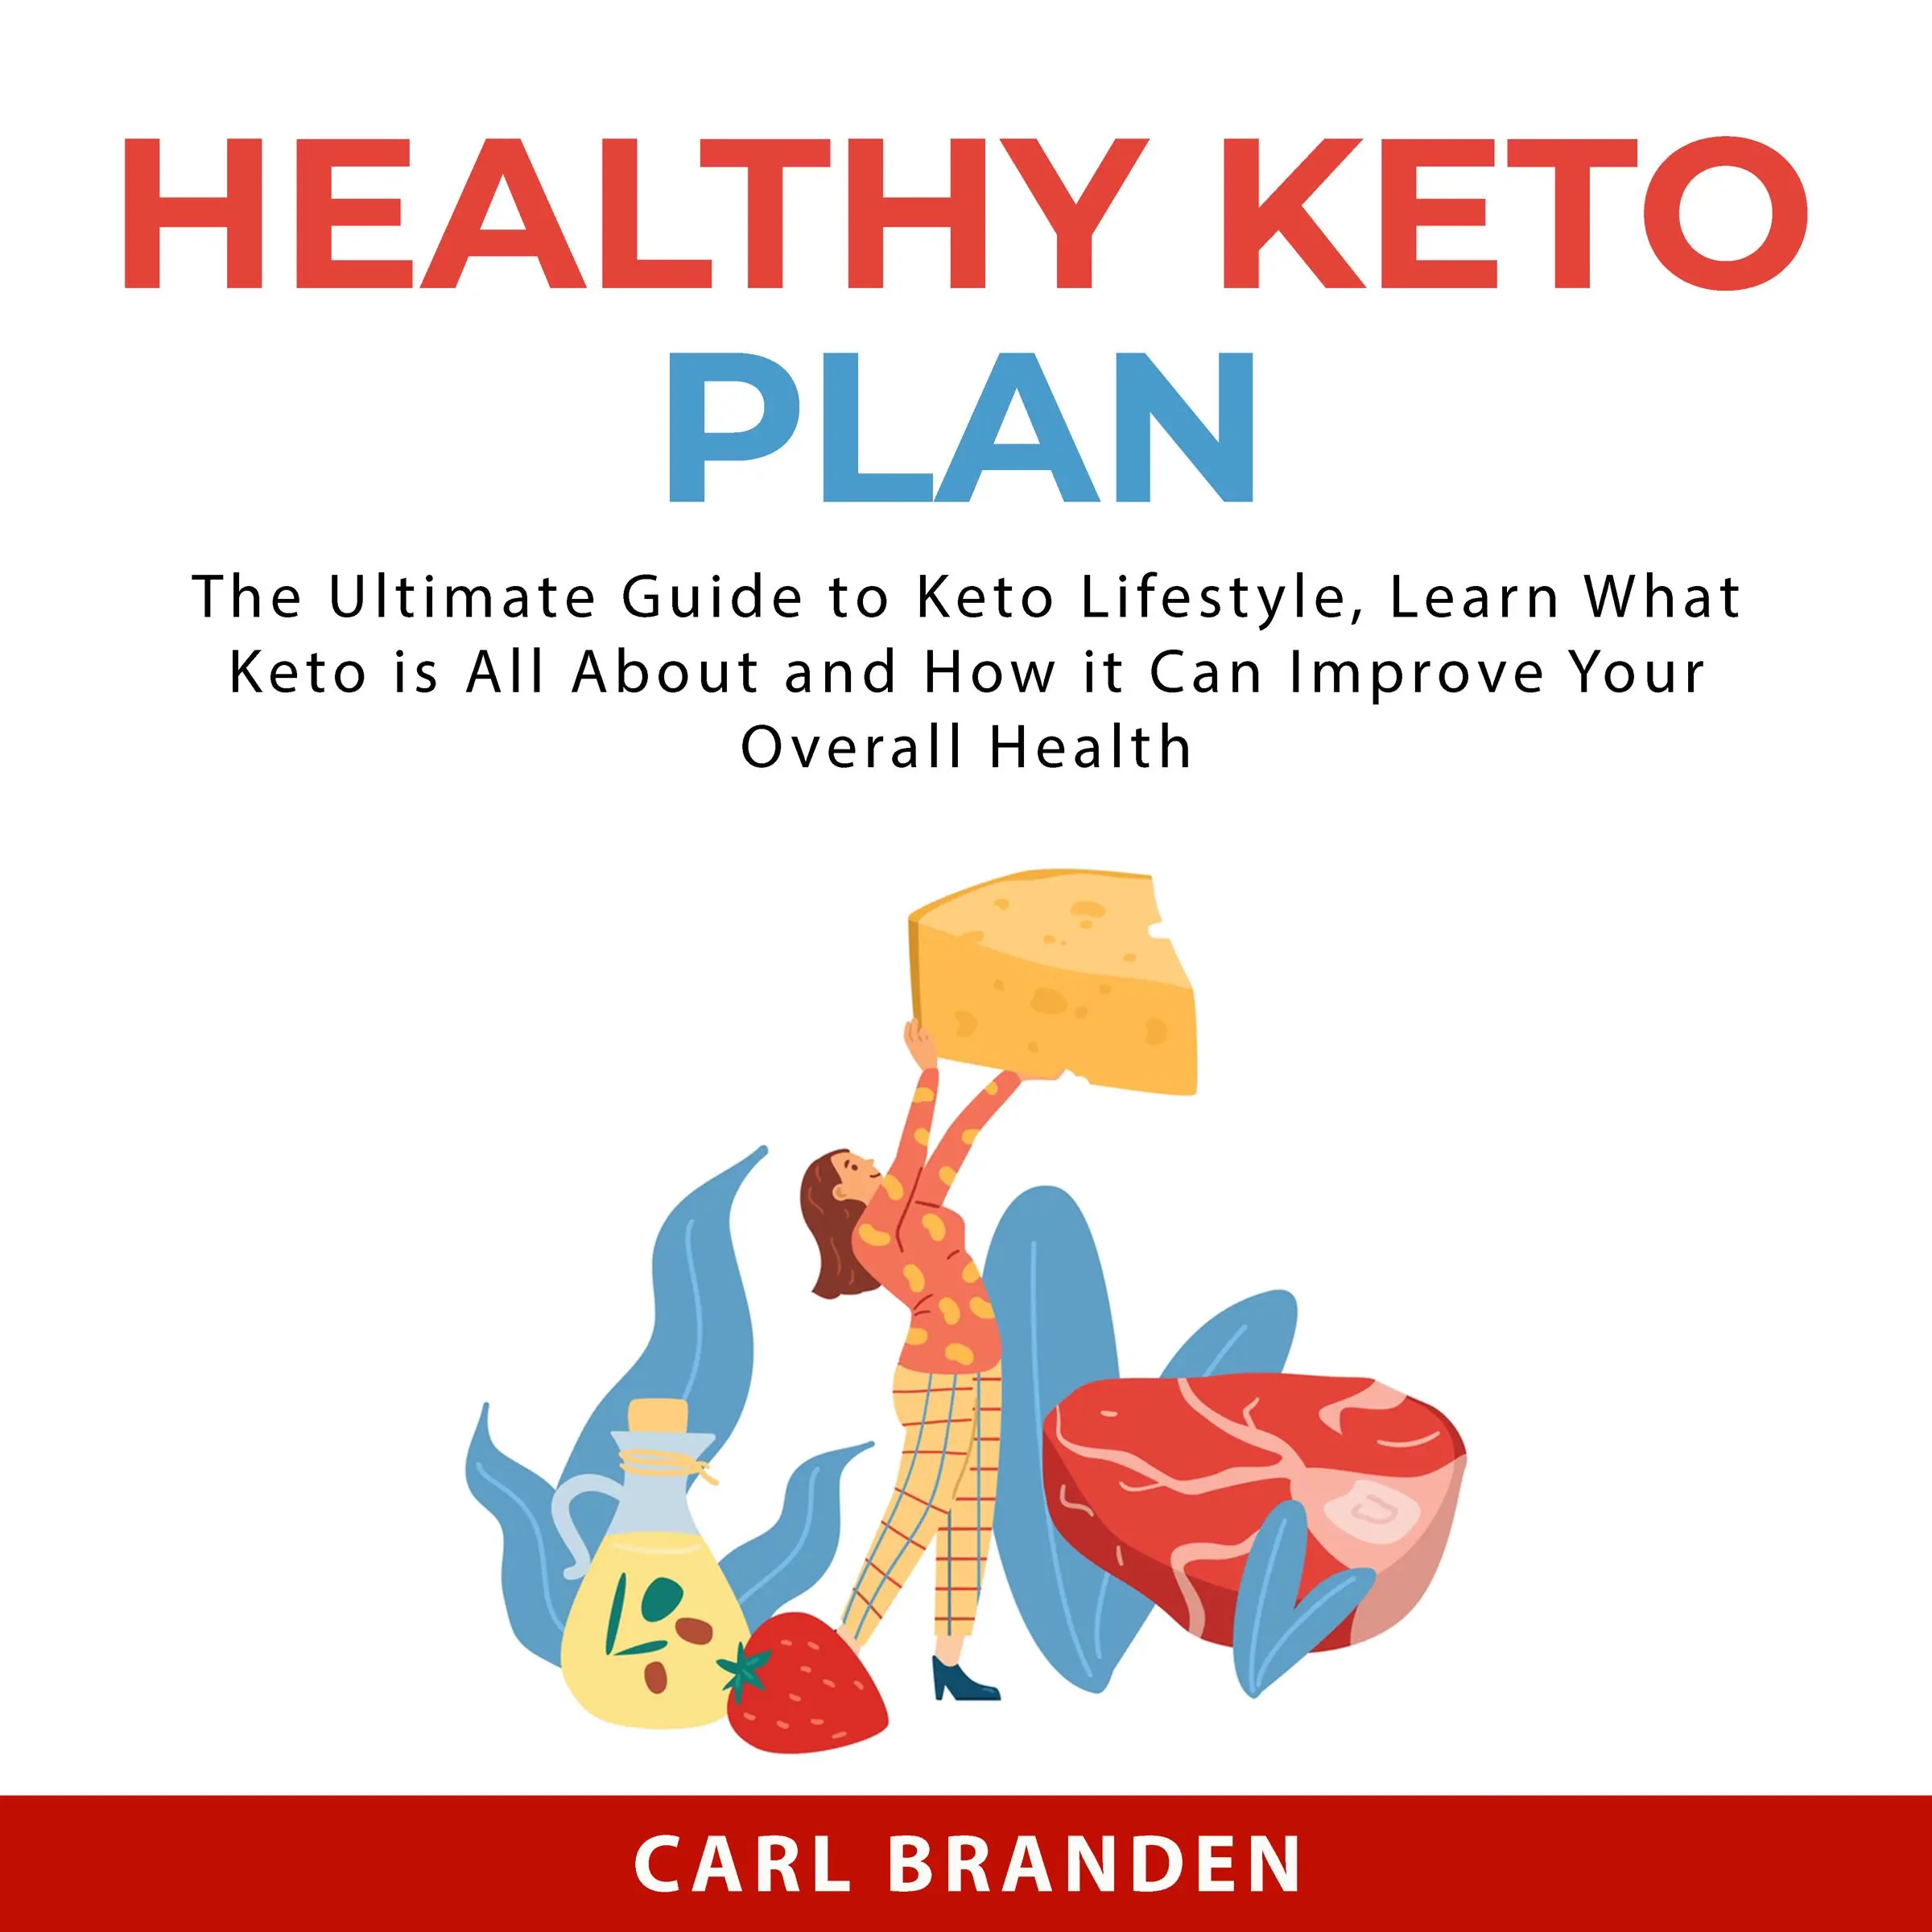 Healthy Keto Plan: The Ultimate Guide to Keto Lifestyle, Learn What Keto is All About and How it Can Improve Your Overall Health Audiobook by Carl Branden